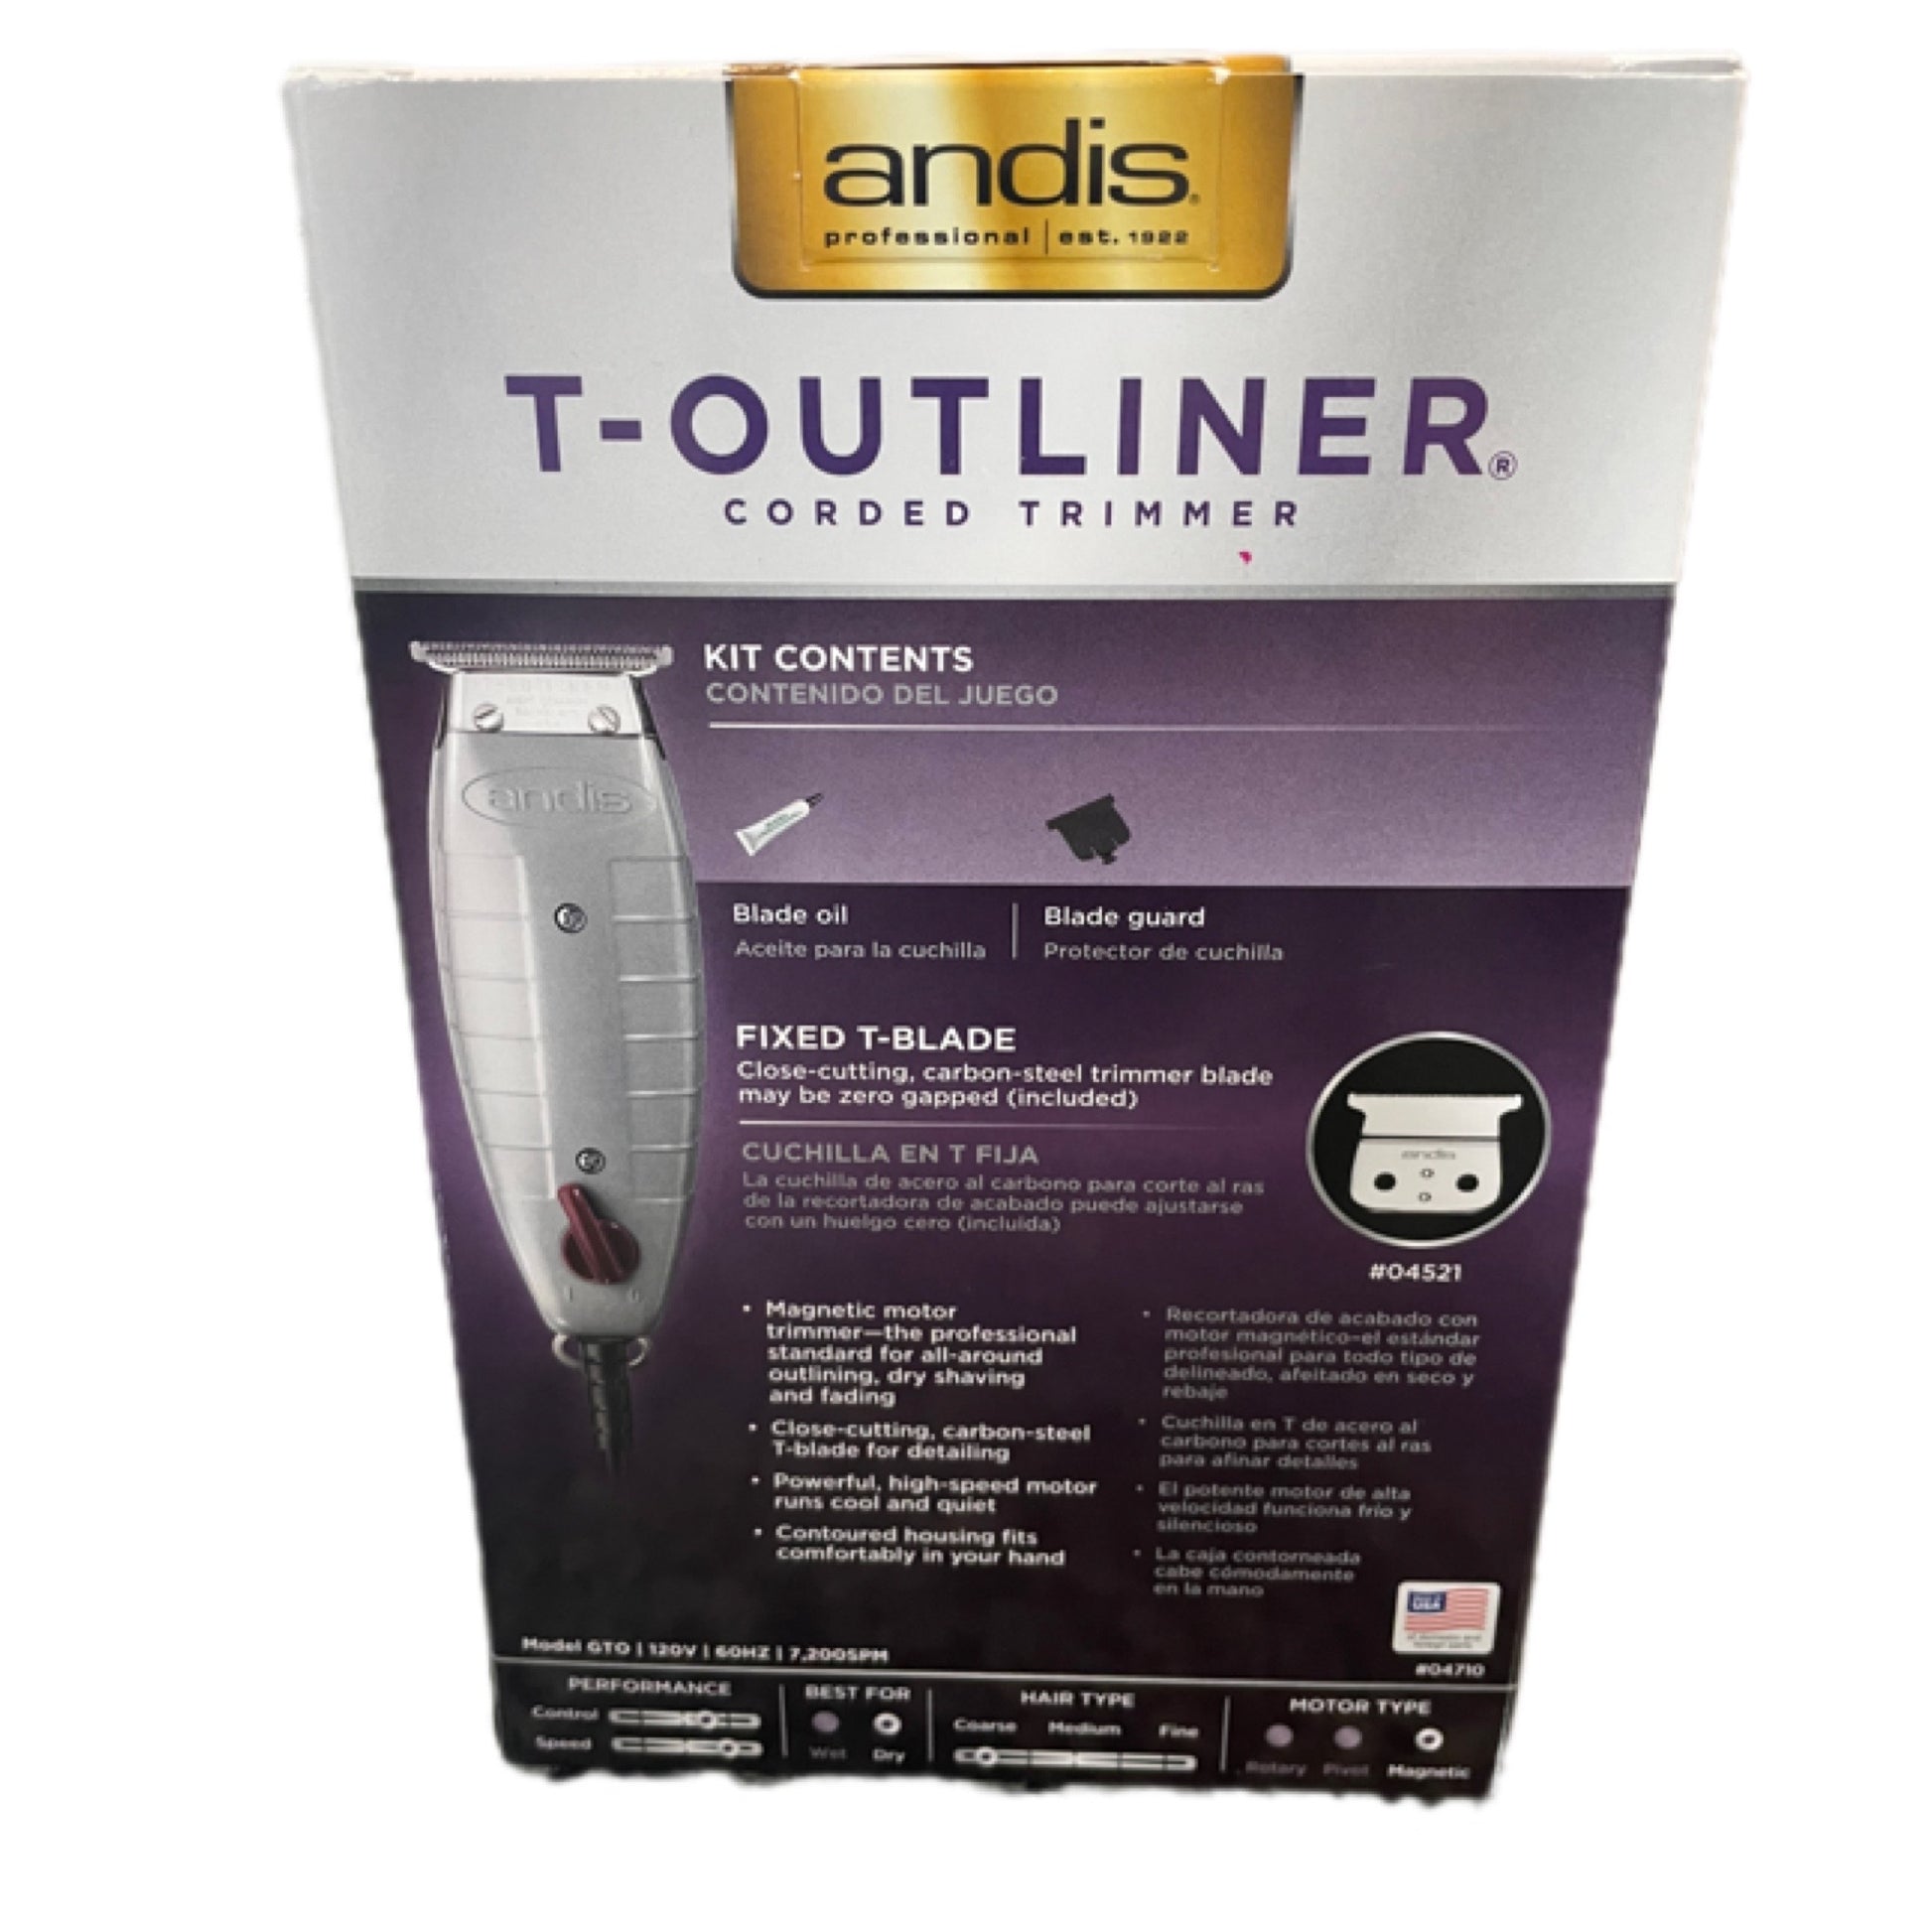 Andis T Outliner Corded Trimmer Box